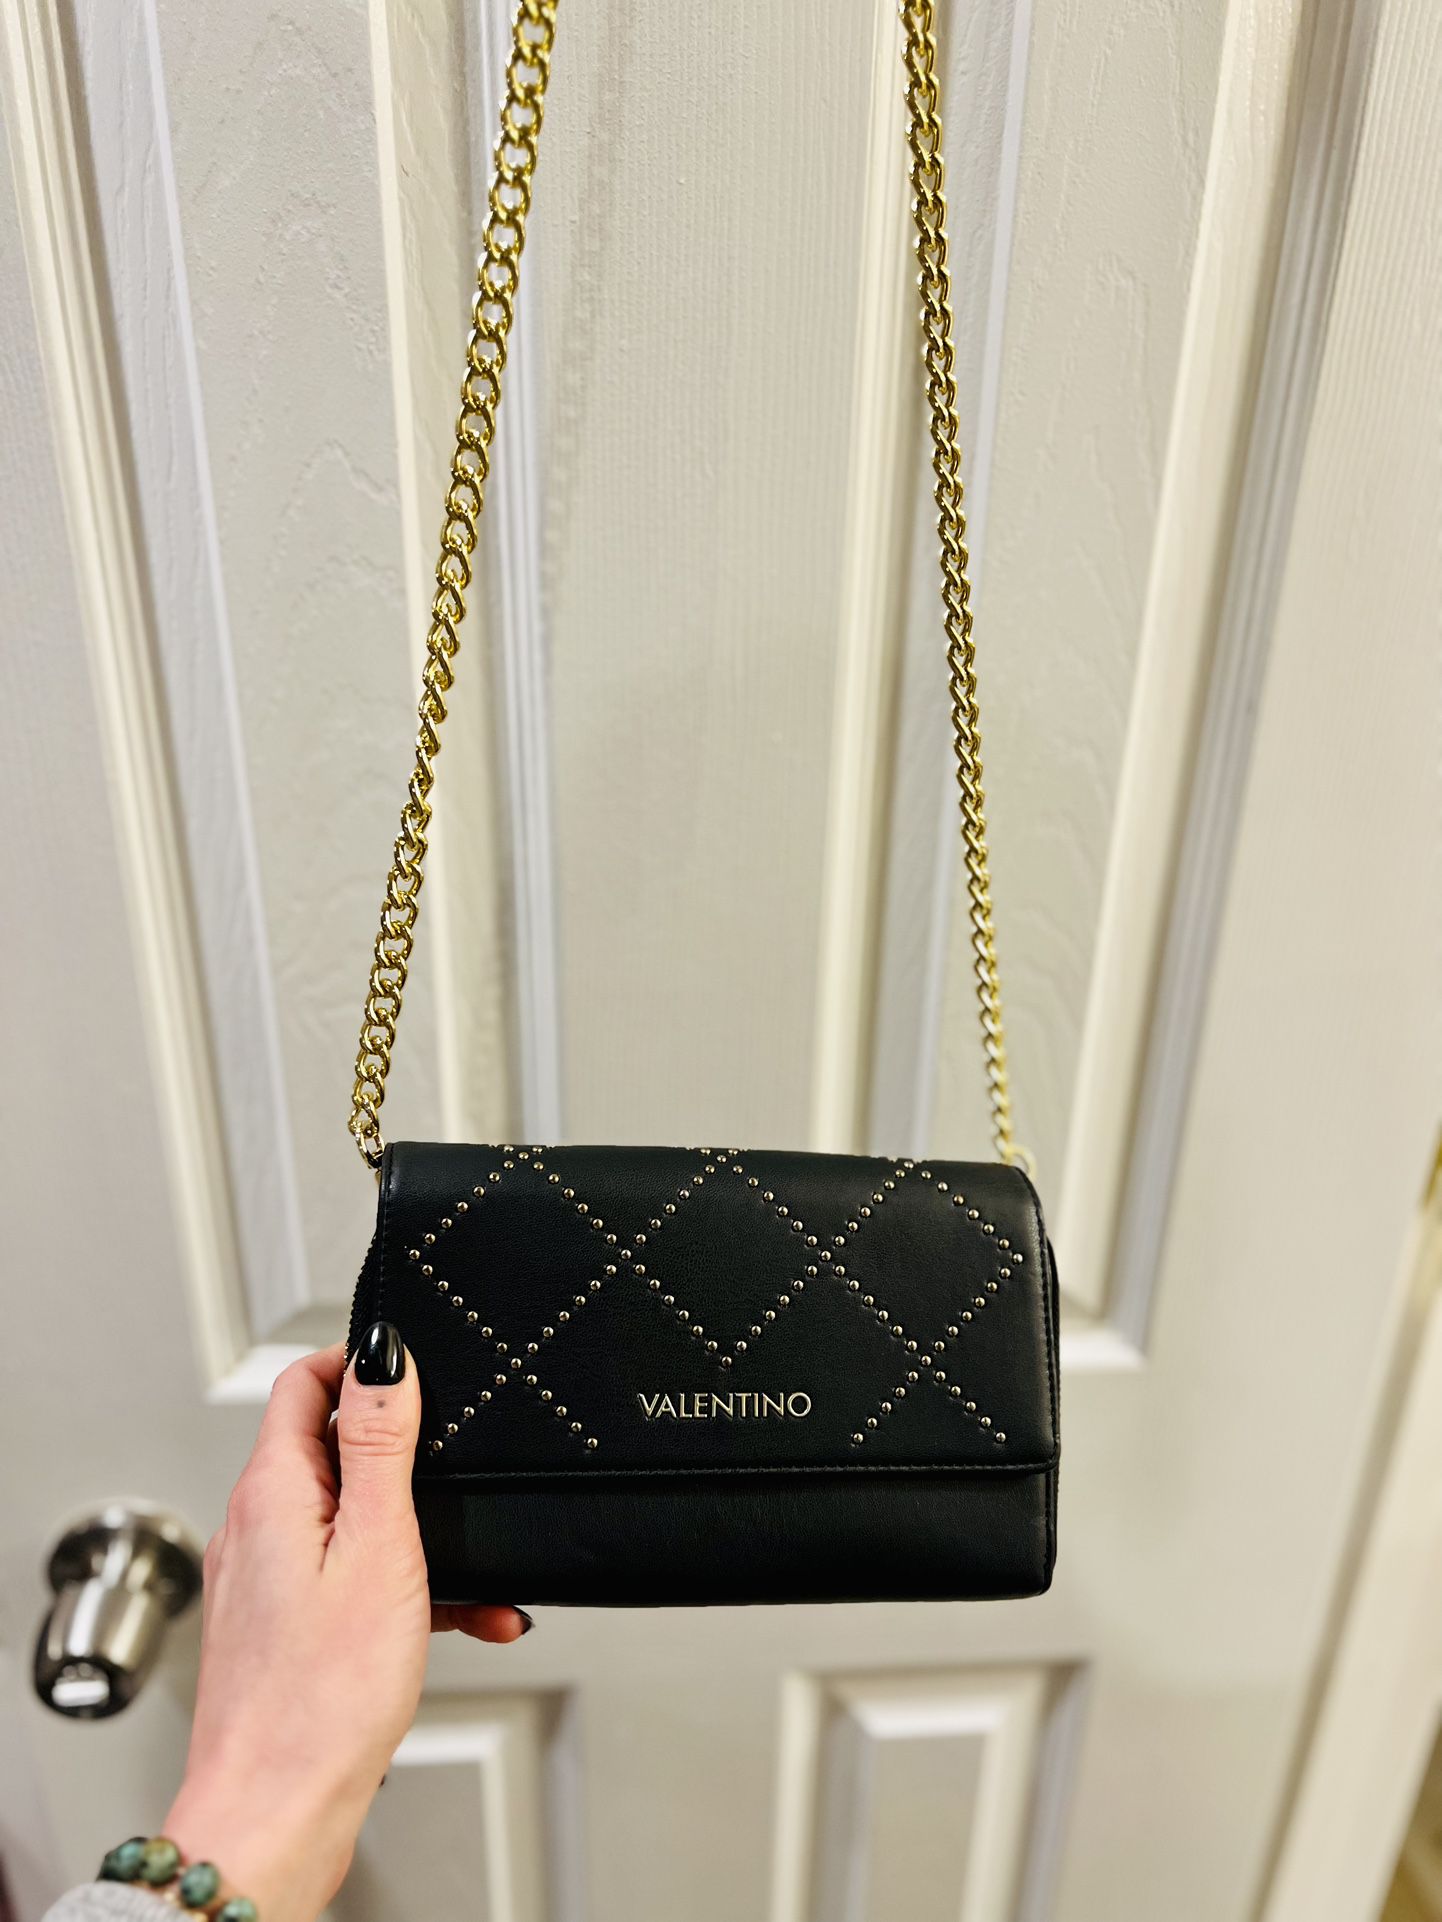 Valentino Clutch with Gold Chain for Sale for Sale in Clarksburg, MD ...